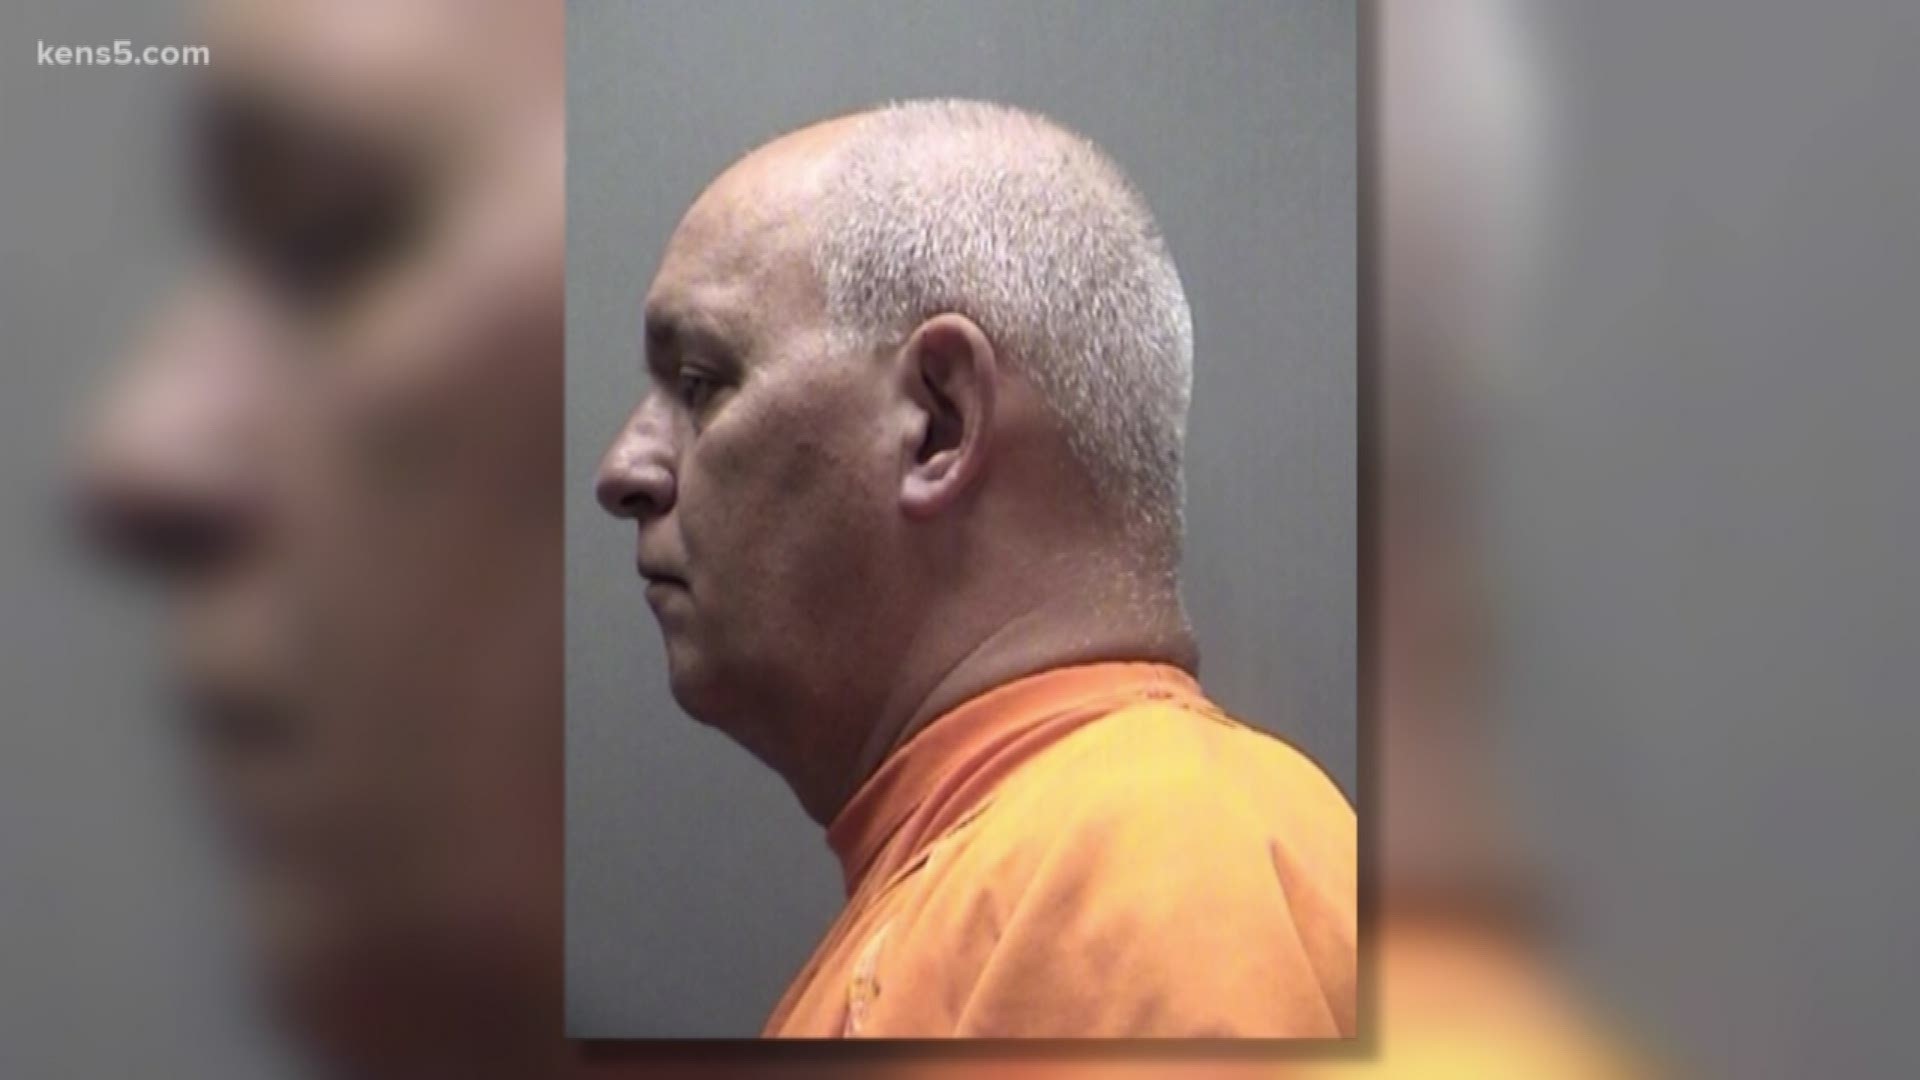 A Wilson County man who claimed he found his wife strangled to death is now behind bars, and charged with her murder.